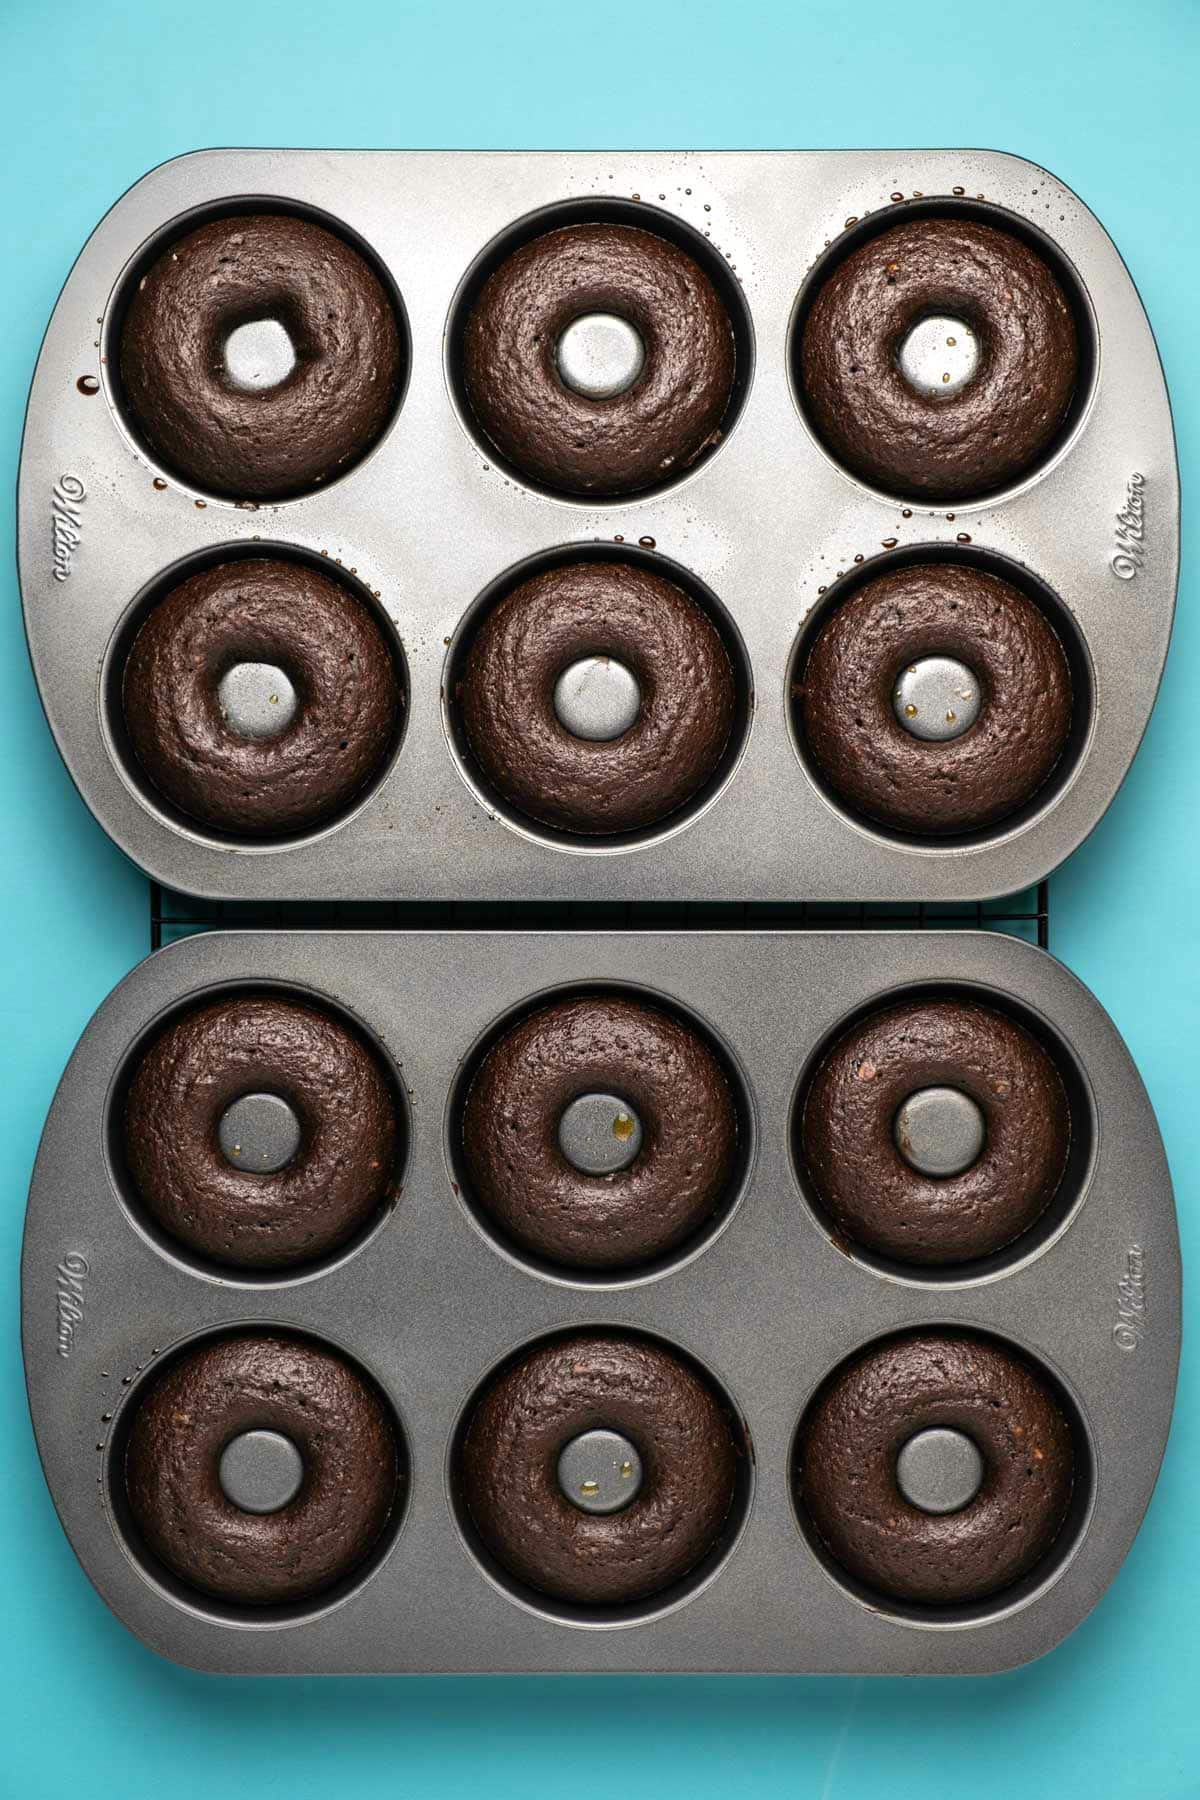 Baked chocolate donuts in donut trays.